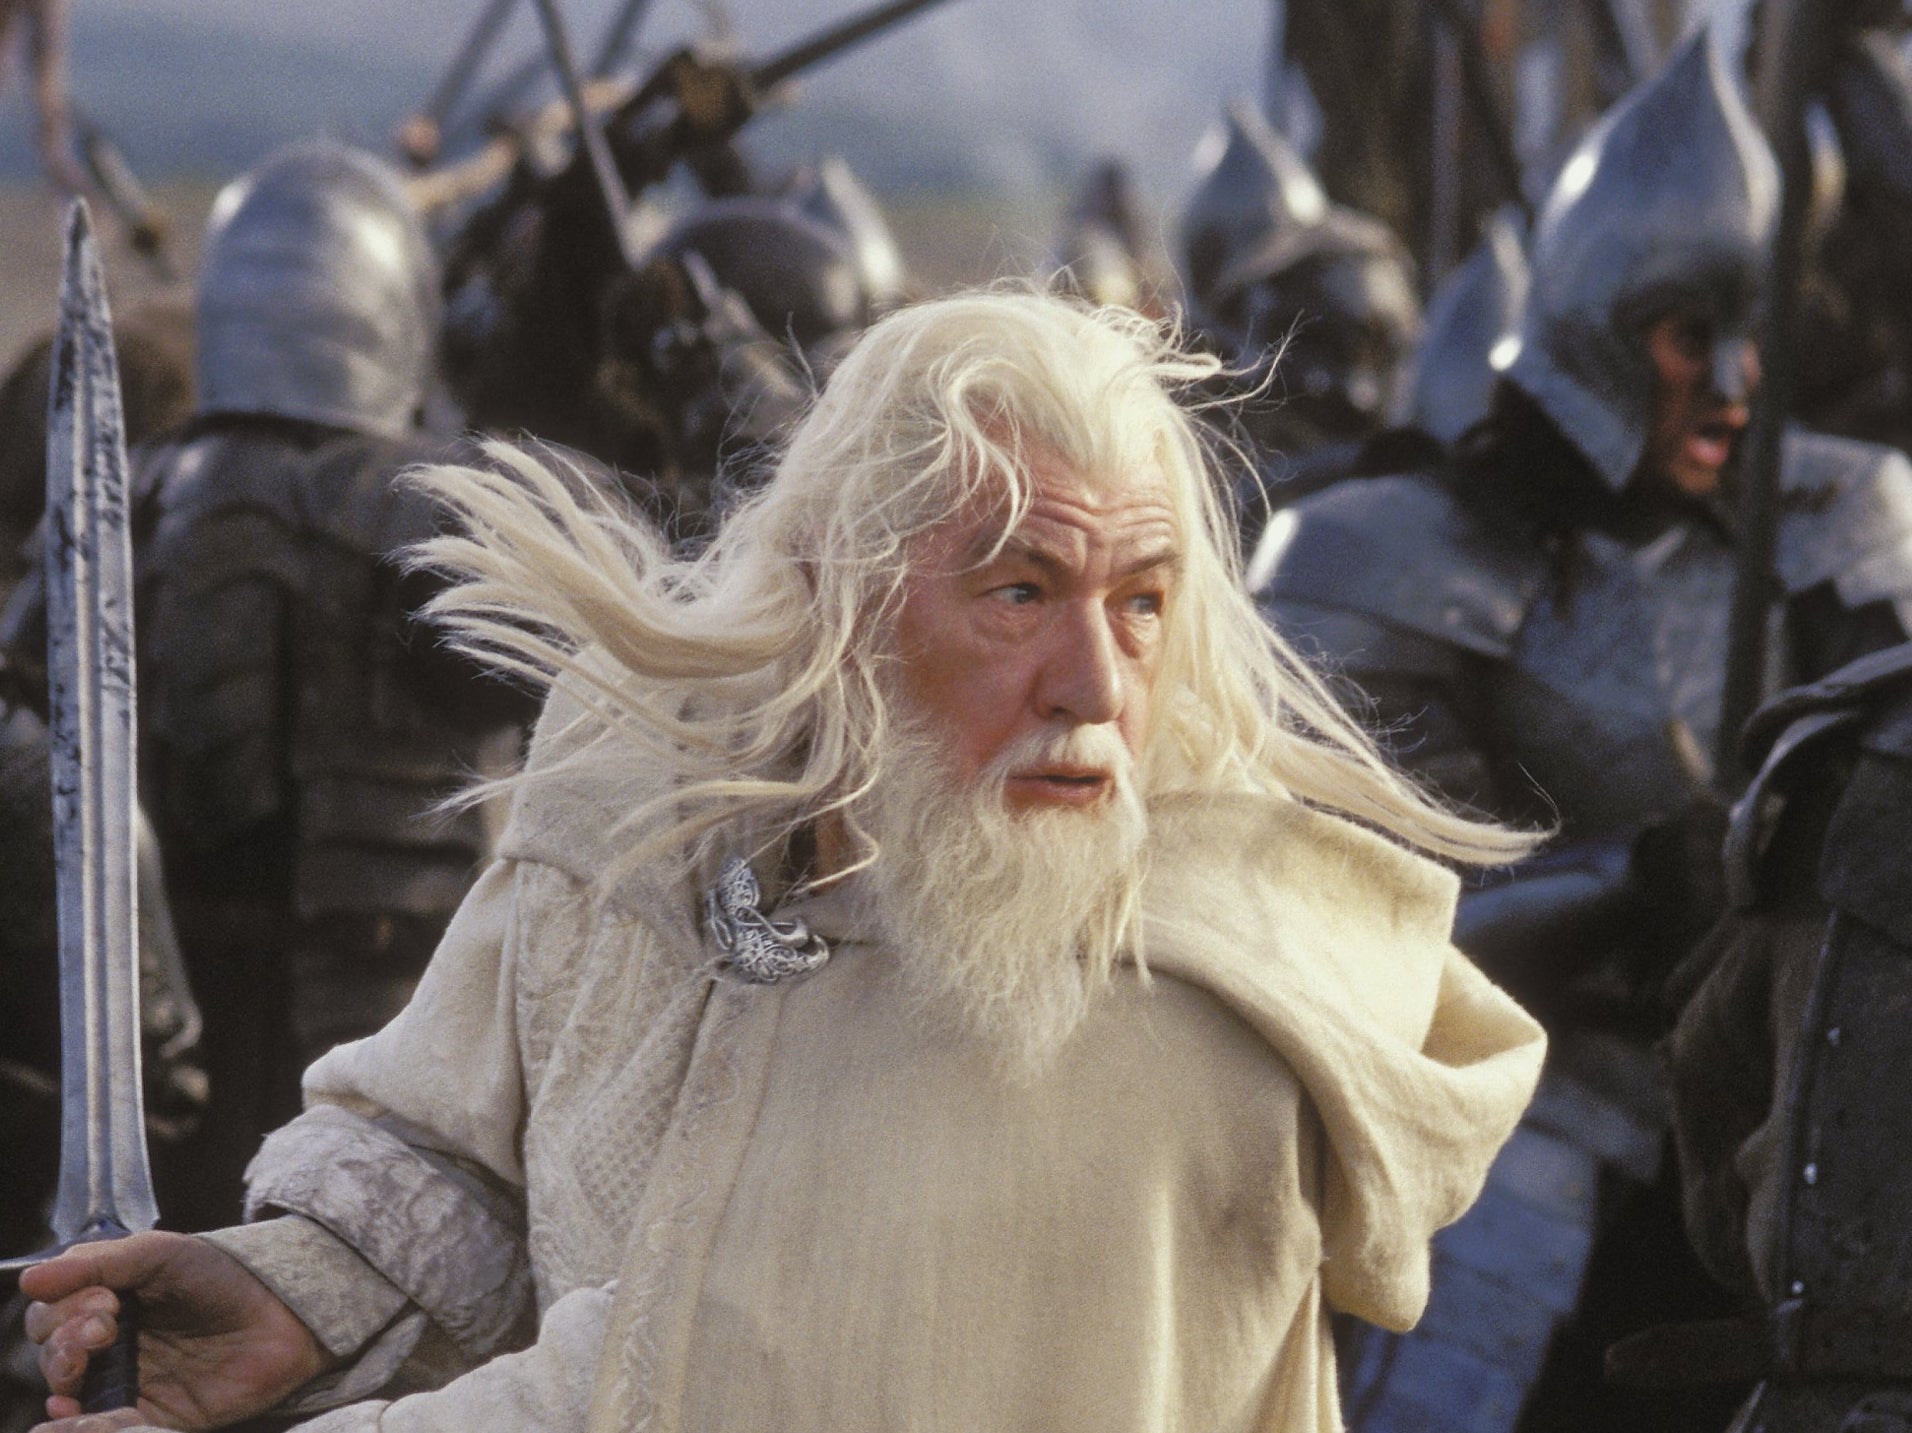 Ian McKellen in ‘The Lord of the Rings: The Return of the King'